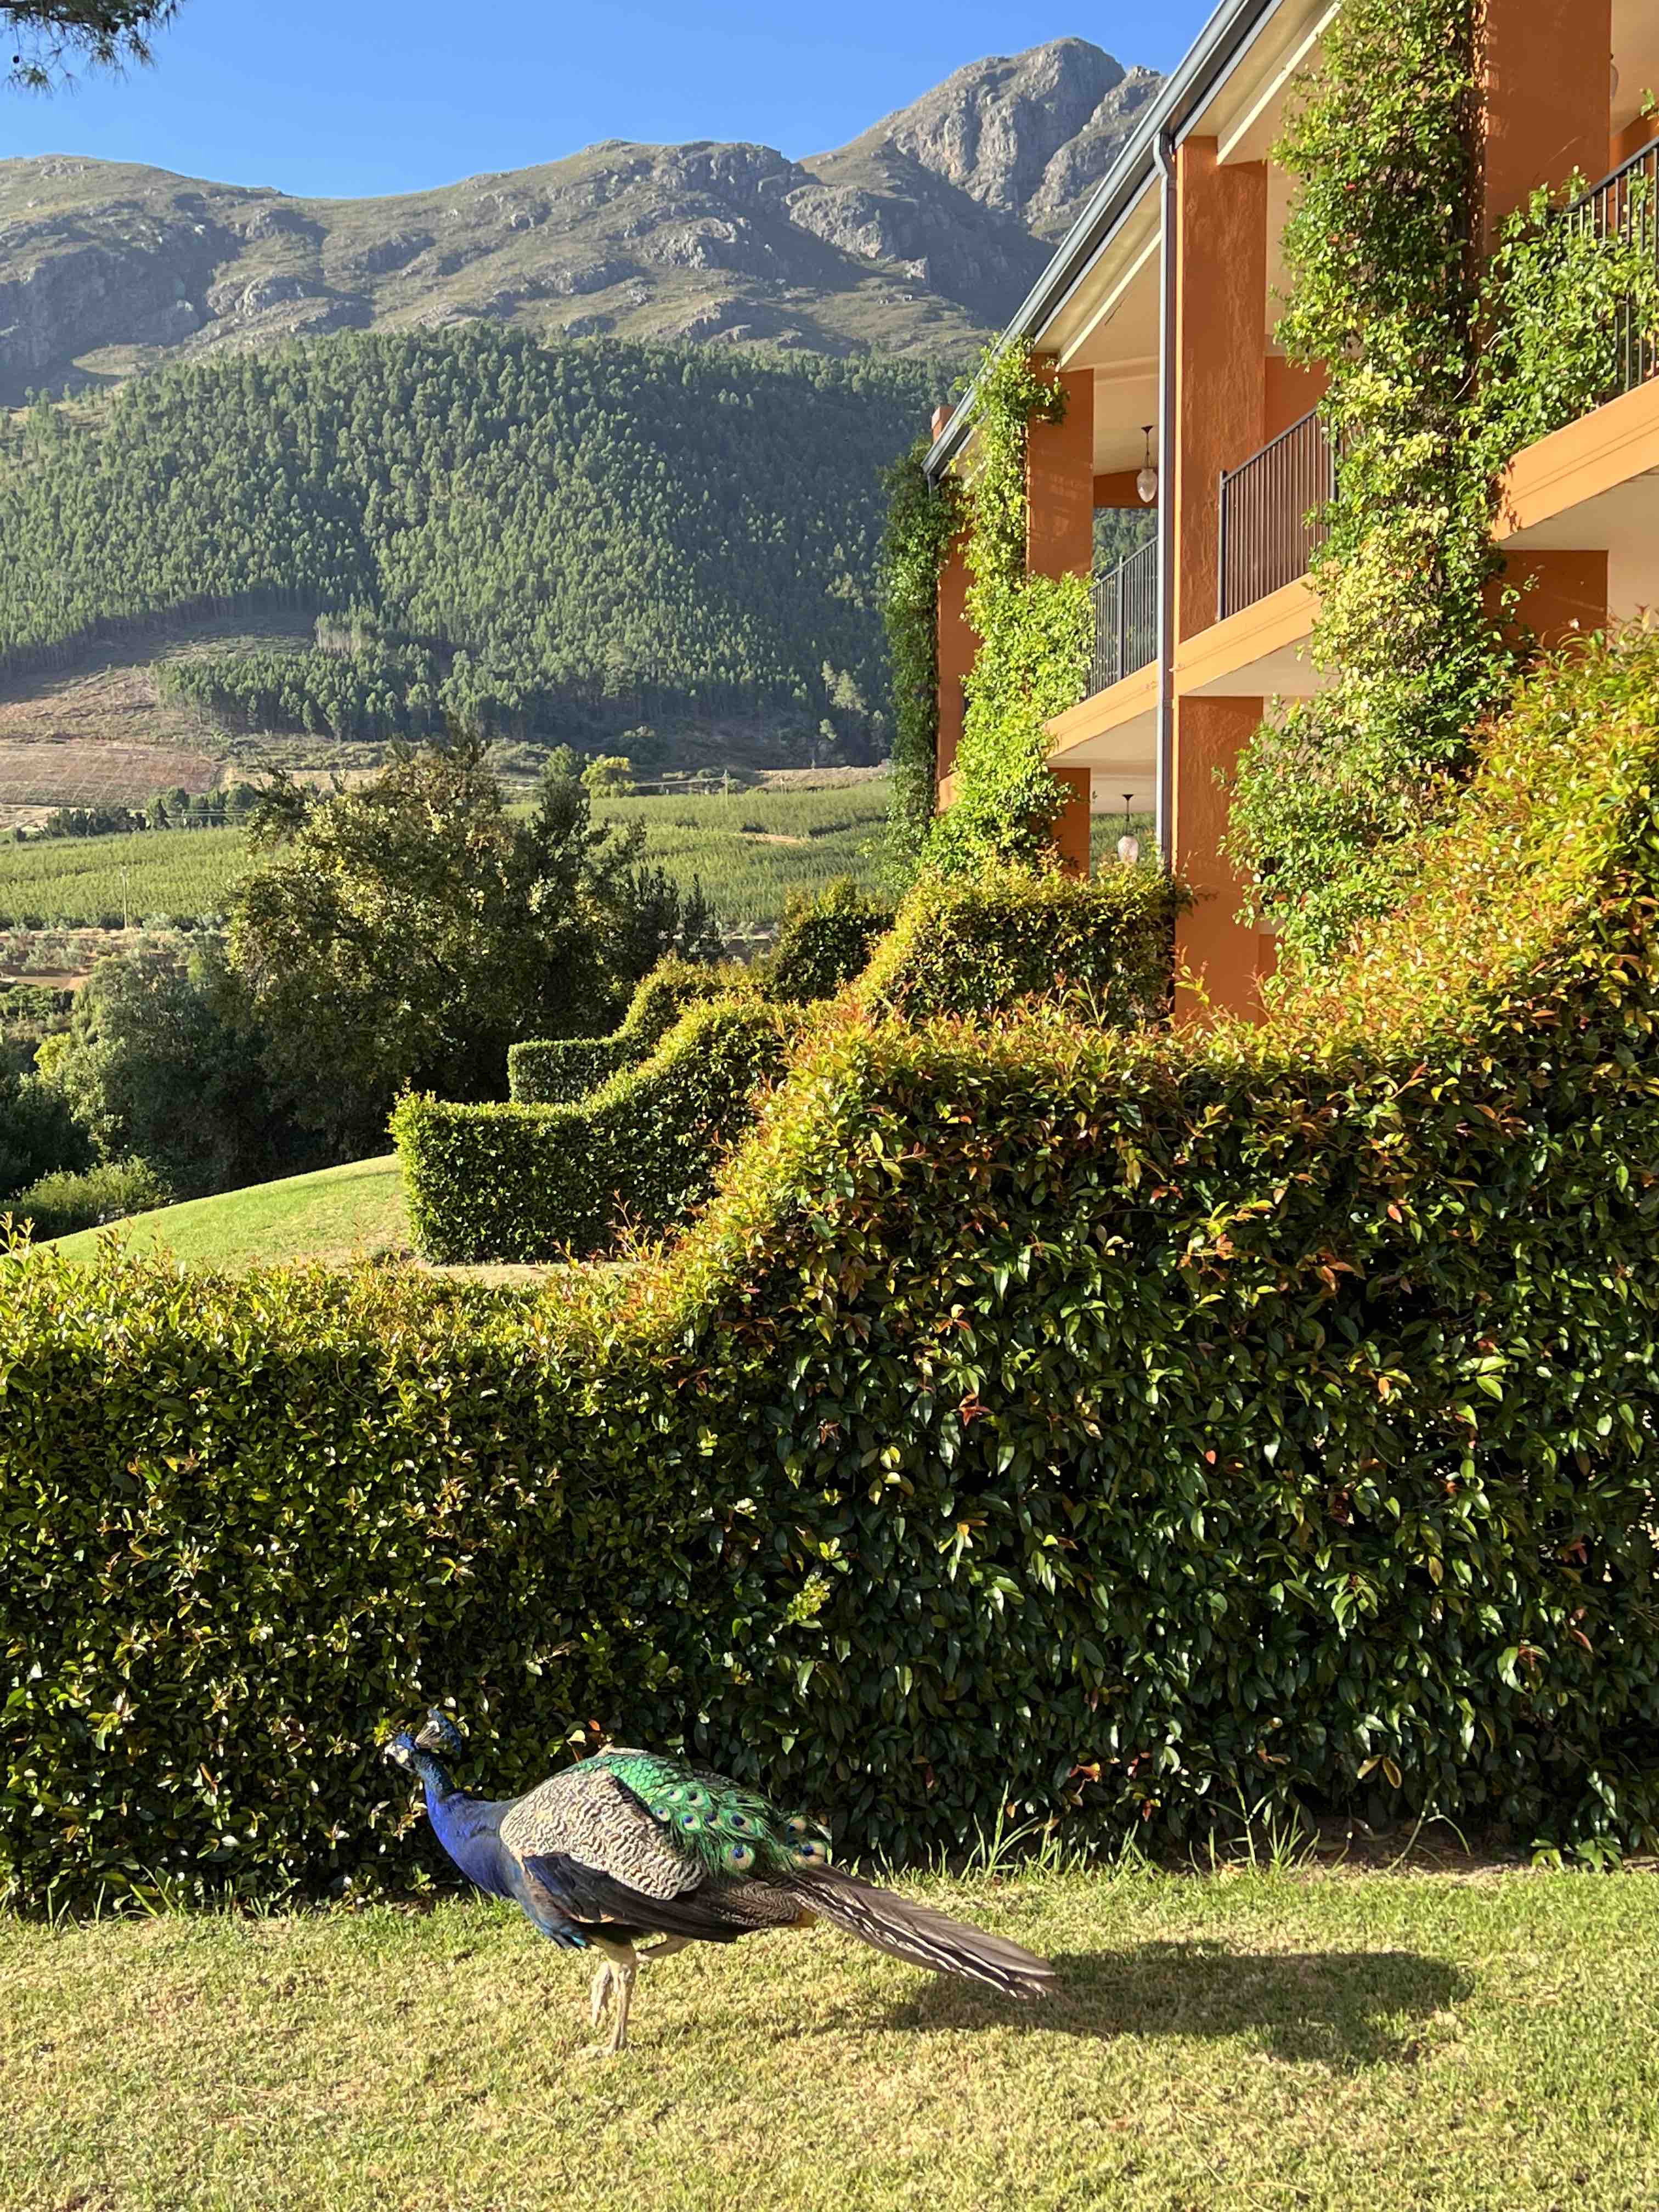 The views from La Residence restaurant in Franschhoek include peacocks walking freely around the property